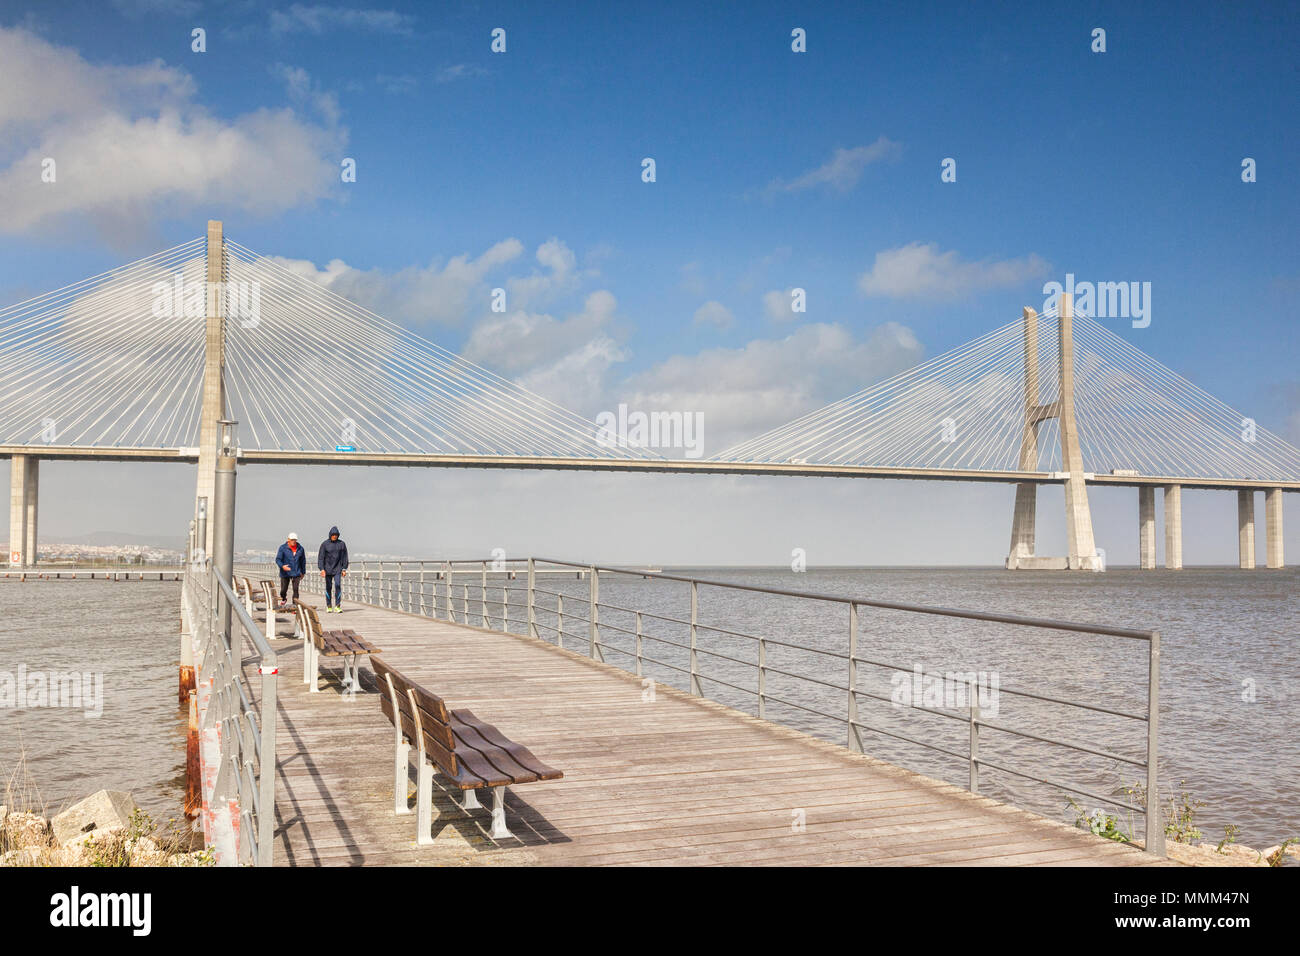 2 March 2018: Lisbon, Portugal - Two men out for a walk on the boardwalk near Vasco da Gama Bridge, the 17km cable stayed bridge which spans the River Stock Photo